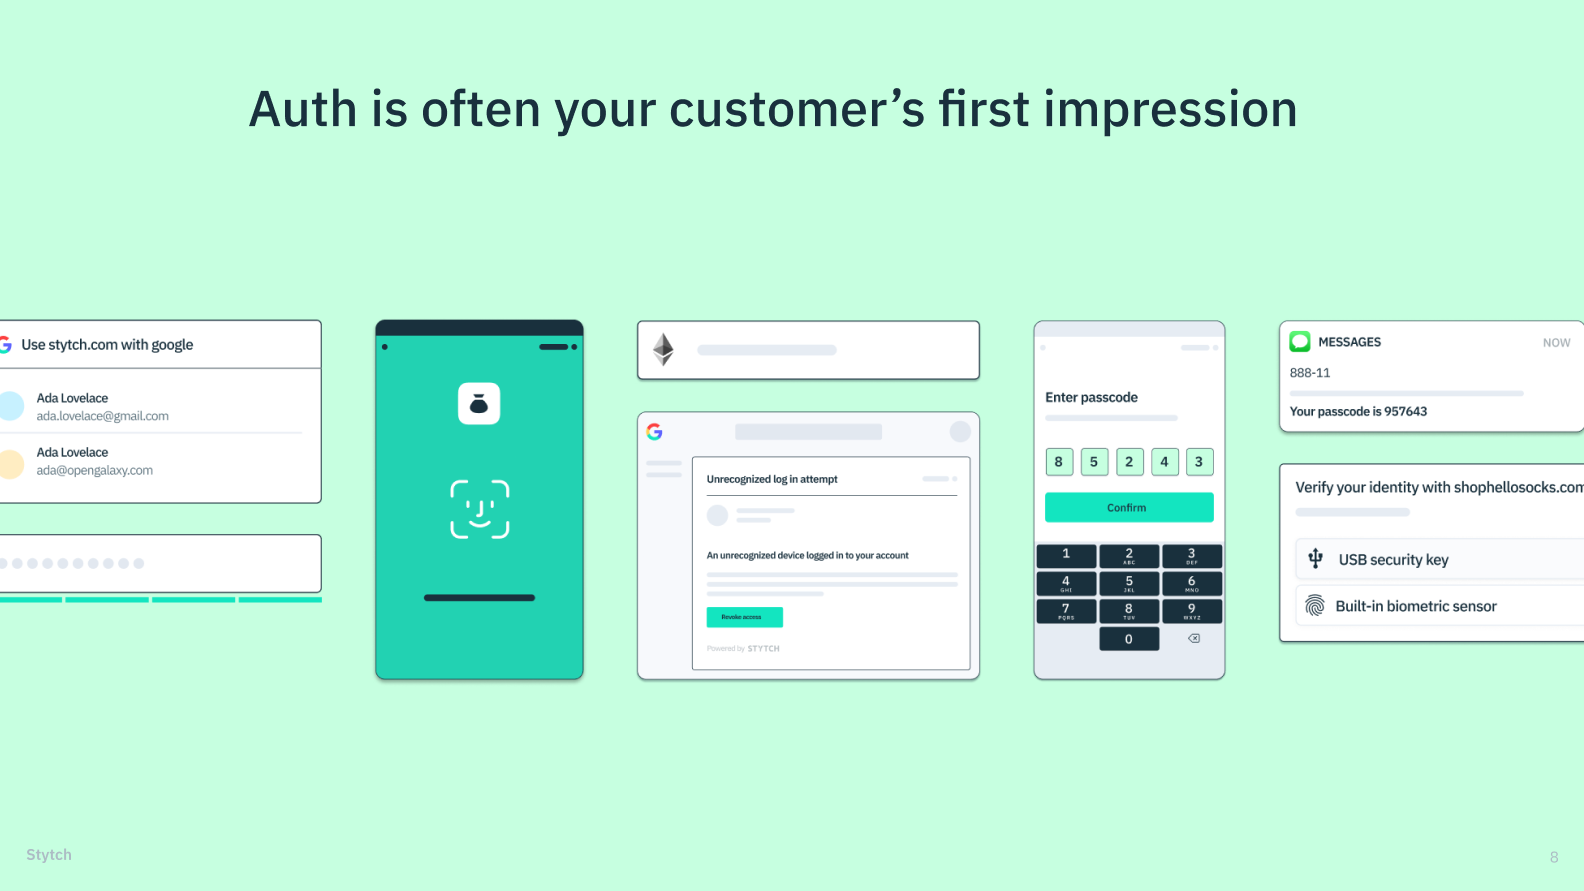 A slide graphic that says "Auth is often your customer's first impression"